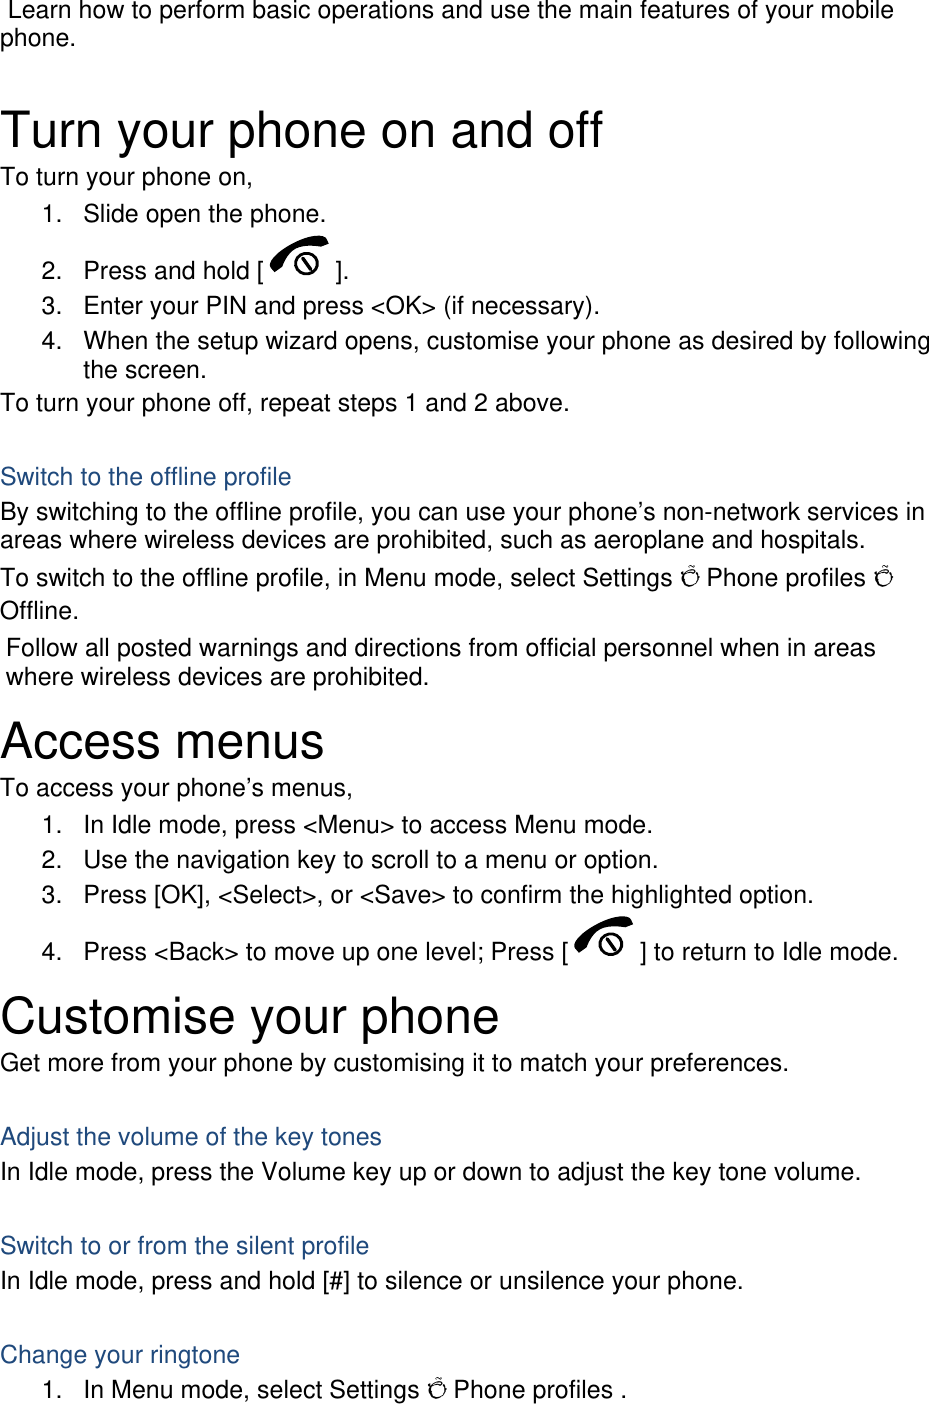  Learn how to perform basic operations and use the main features of your mobile phone.   Turn your phone on and off To turn your phone on, 1.  Slide open the phone. 2.  Press and hold [ ]. 3.  Enter your PIN and press &lt;OK&gt; (if necessary). 4.  When the setup wizard opens, customise your phone as desired by following the screen. To turn your phone off, repeat steps 1 and 2 above.  Switch to the offline profile By switching to the offline profile, you can use your phone’s non-network services in areas where wireless devices are prohibited, such as aeroplane and hospitals. To switch to the offline profile, in Menu mode, select Settings Õ Phone profiles Õ Offline. Follow all posted warnings and directions from official personnel when in areas where wireless devices are prohibited. Access menus To access your phone’s menus, 1.  In Idle mode, press &lt;Menu&gt; to access Menu mode. 2.  Use the navigation key to scroll to a menu or option. 3.  Press [OK], &lt;Select&gt;, or &lt;Save&gt; to confirm the highlighted option. 4.  Press &lt;Back&gt; to move up one level; Press [ ] to return to Idle mode. Customise your phone Get more from your phone by customising it to match your preferences.  Adjust the volume of the key tones In Idle mode, press the Volume key up or down to adjust the key tone volume.  Switch to or from the silent profile In Idle mode, press and hold [#] to silence or unsilence your phone.  Change your ringtone 1.  In Menu mode, select Settings Õ Phone profiles . 